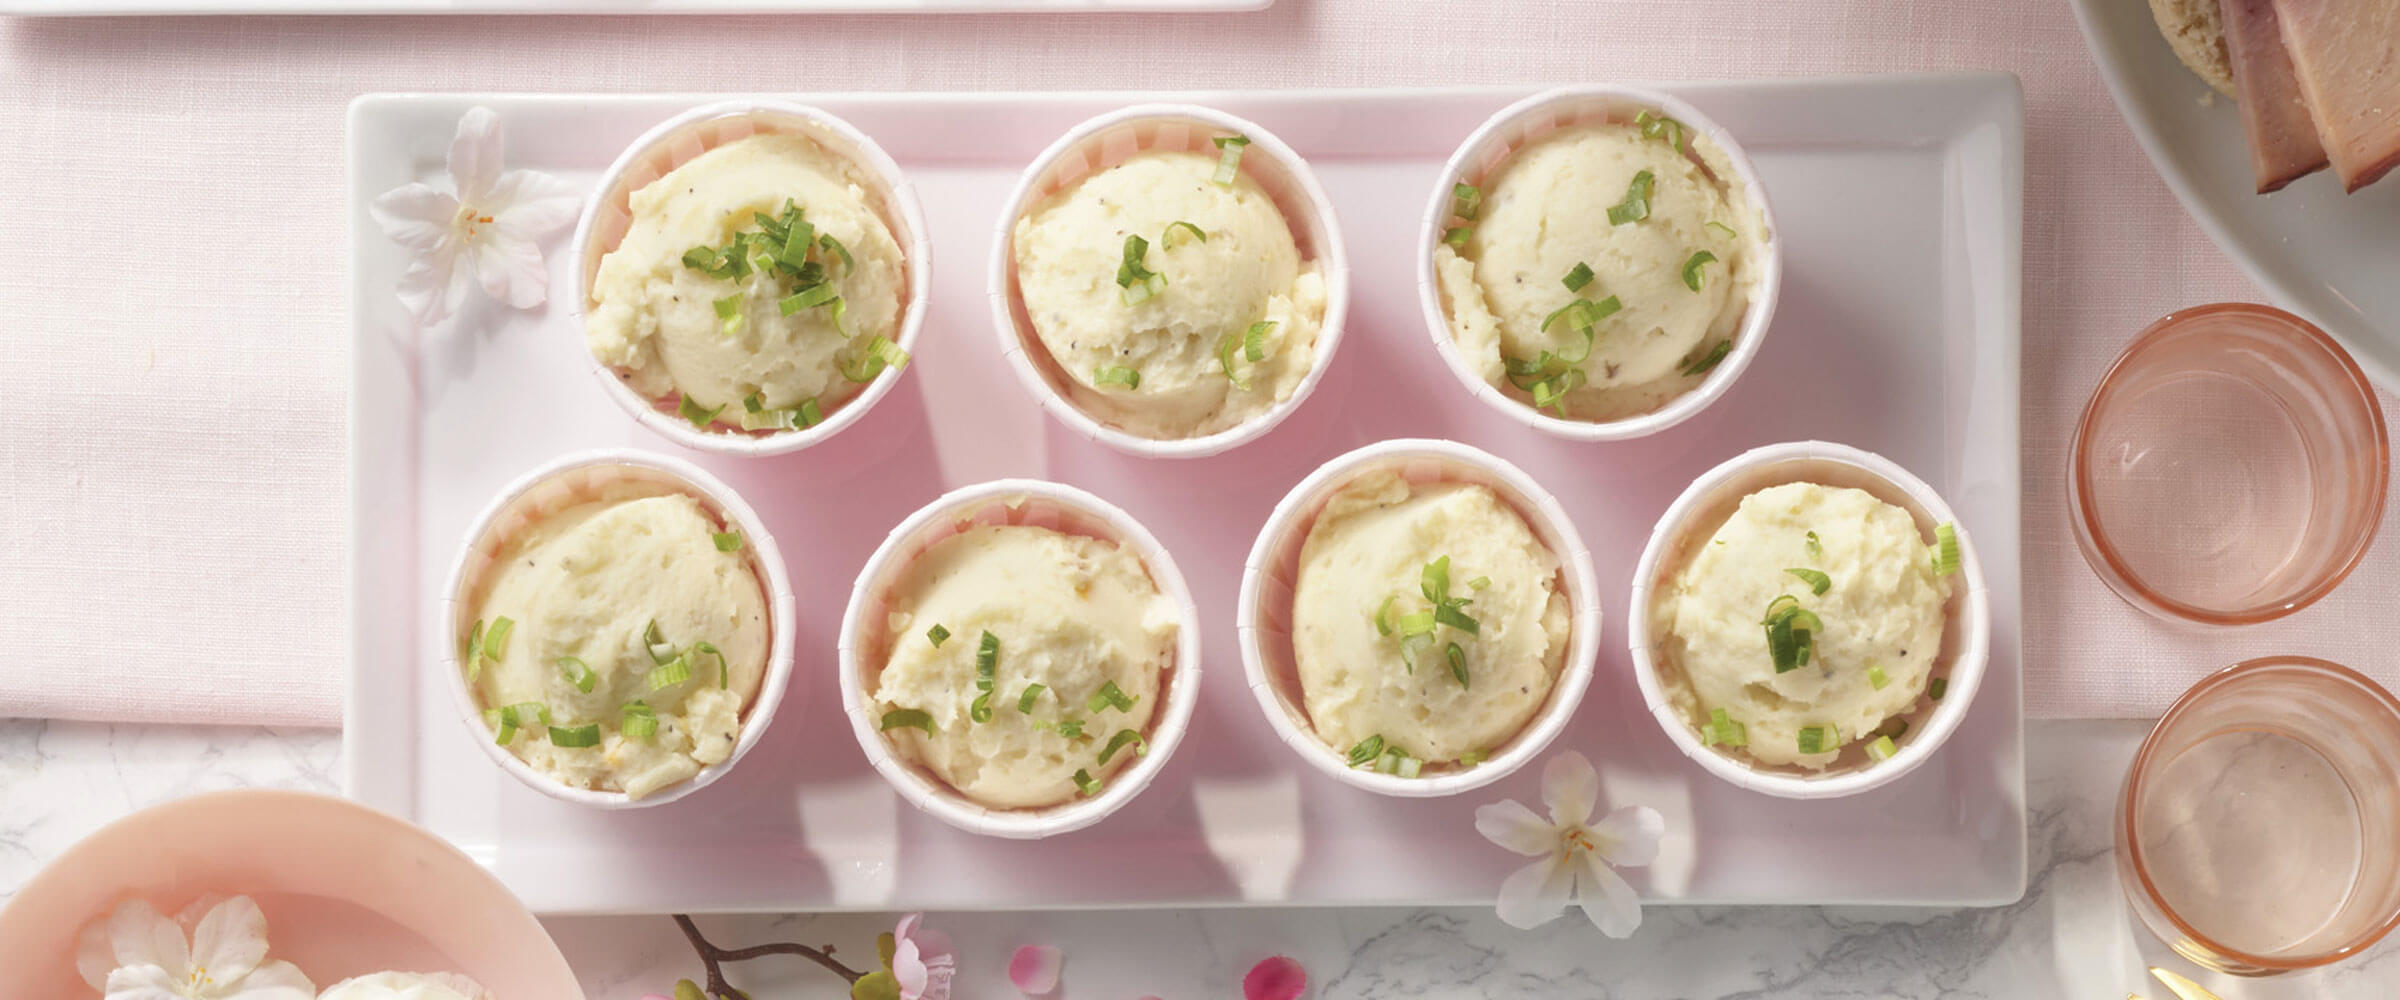 Mashed Potato Puffs in individual bowls on white plate